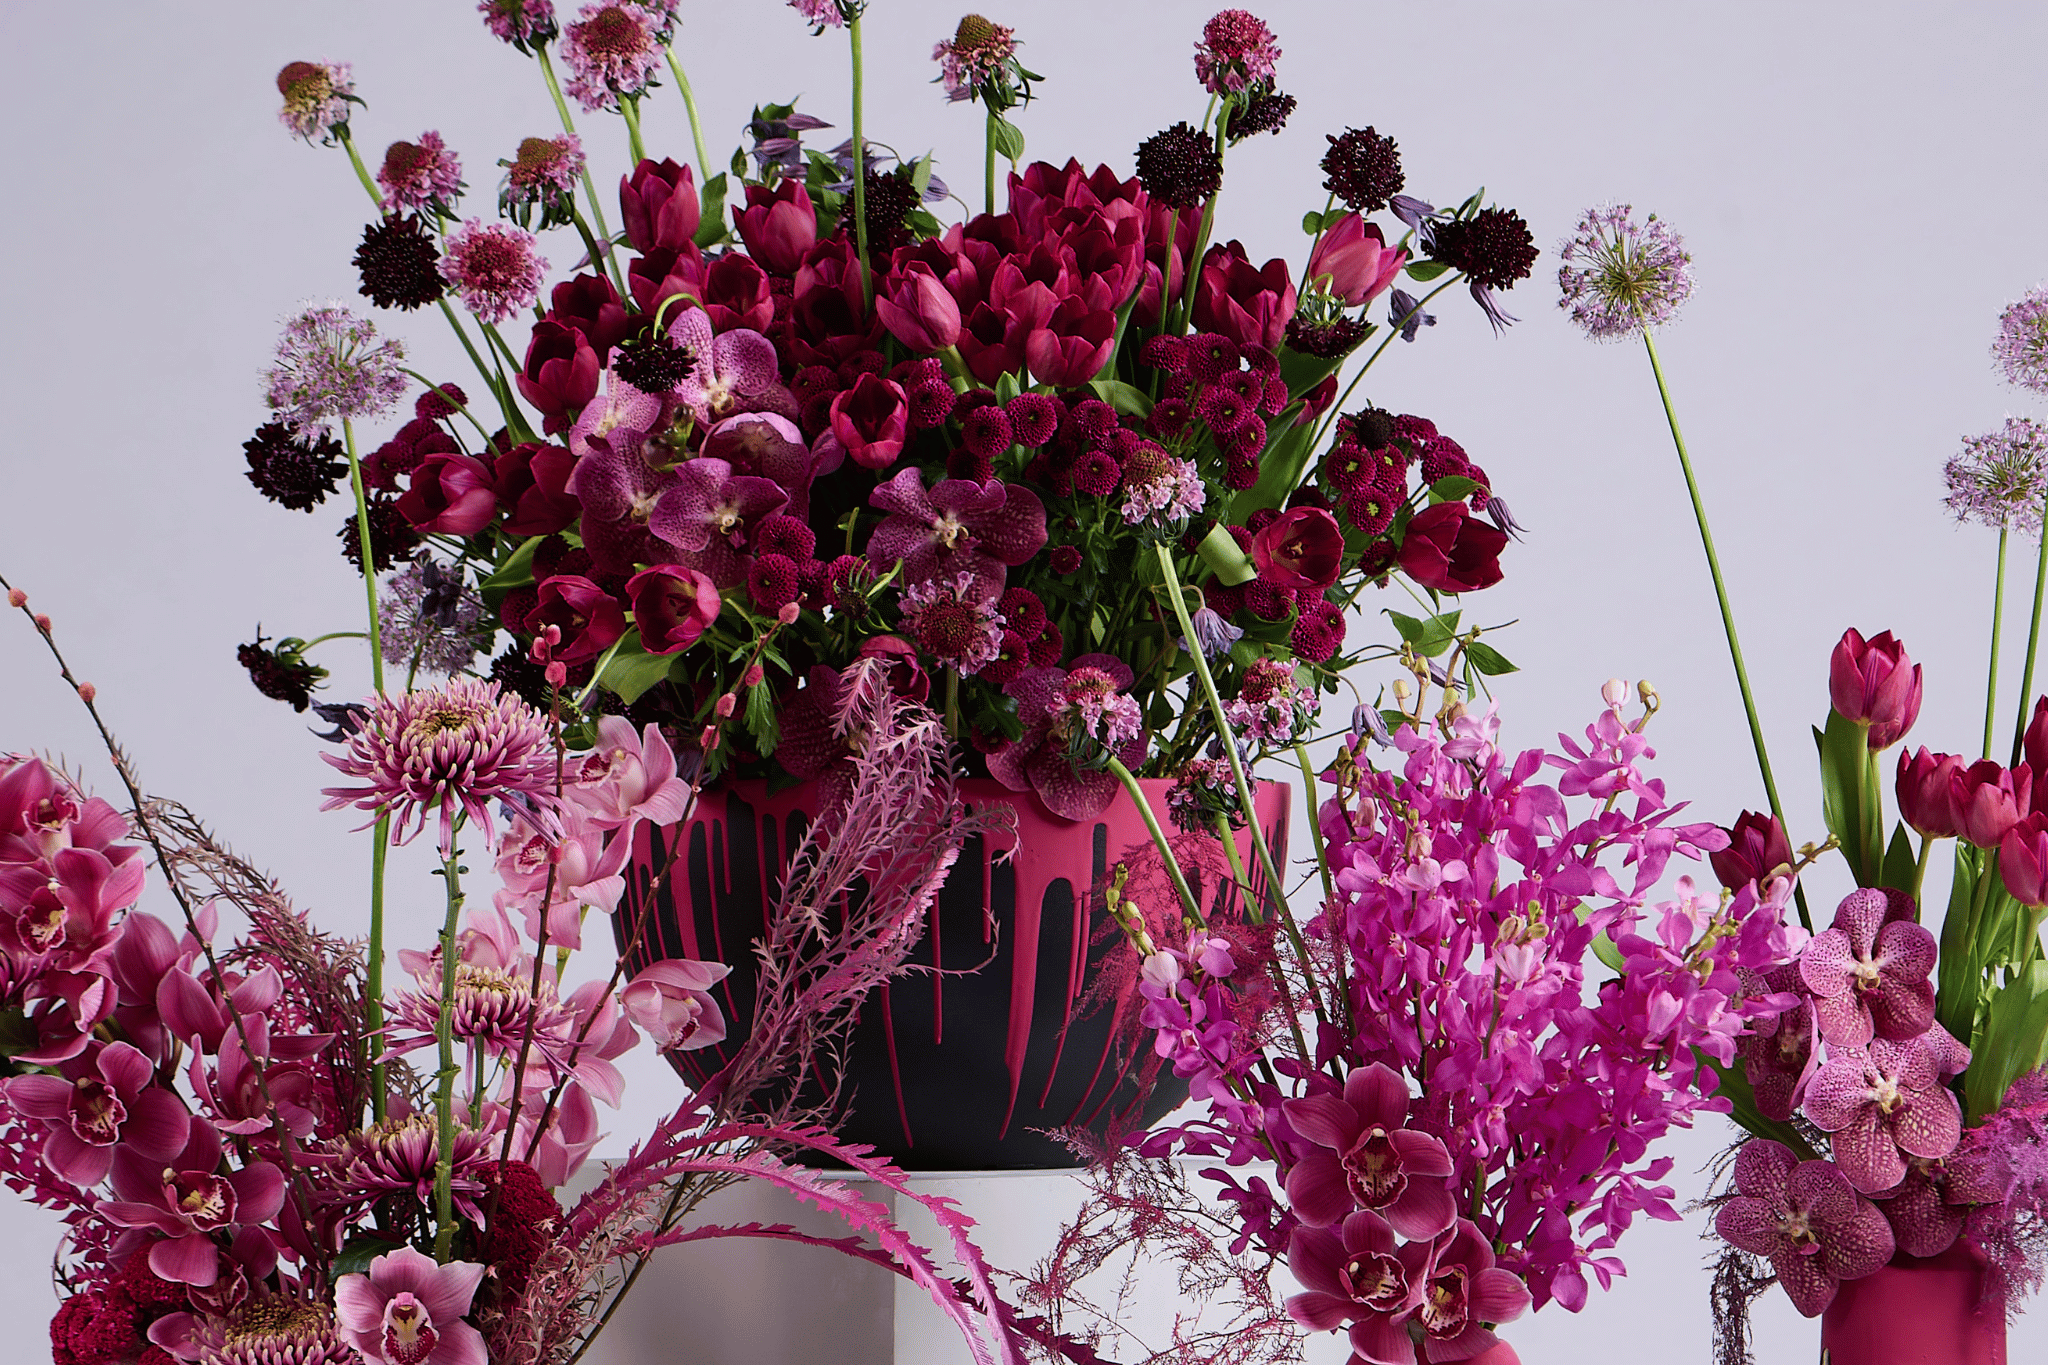 Stay up to date with Dubai’s latest floral trends!